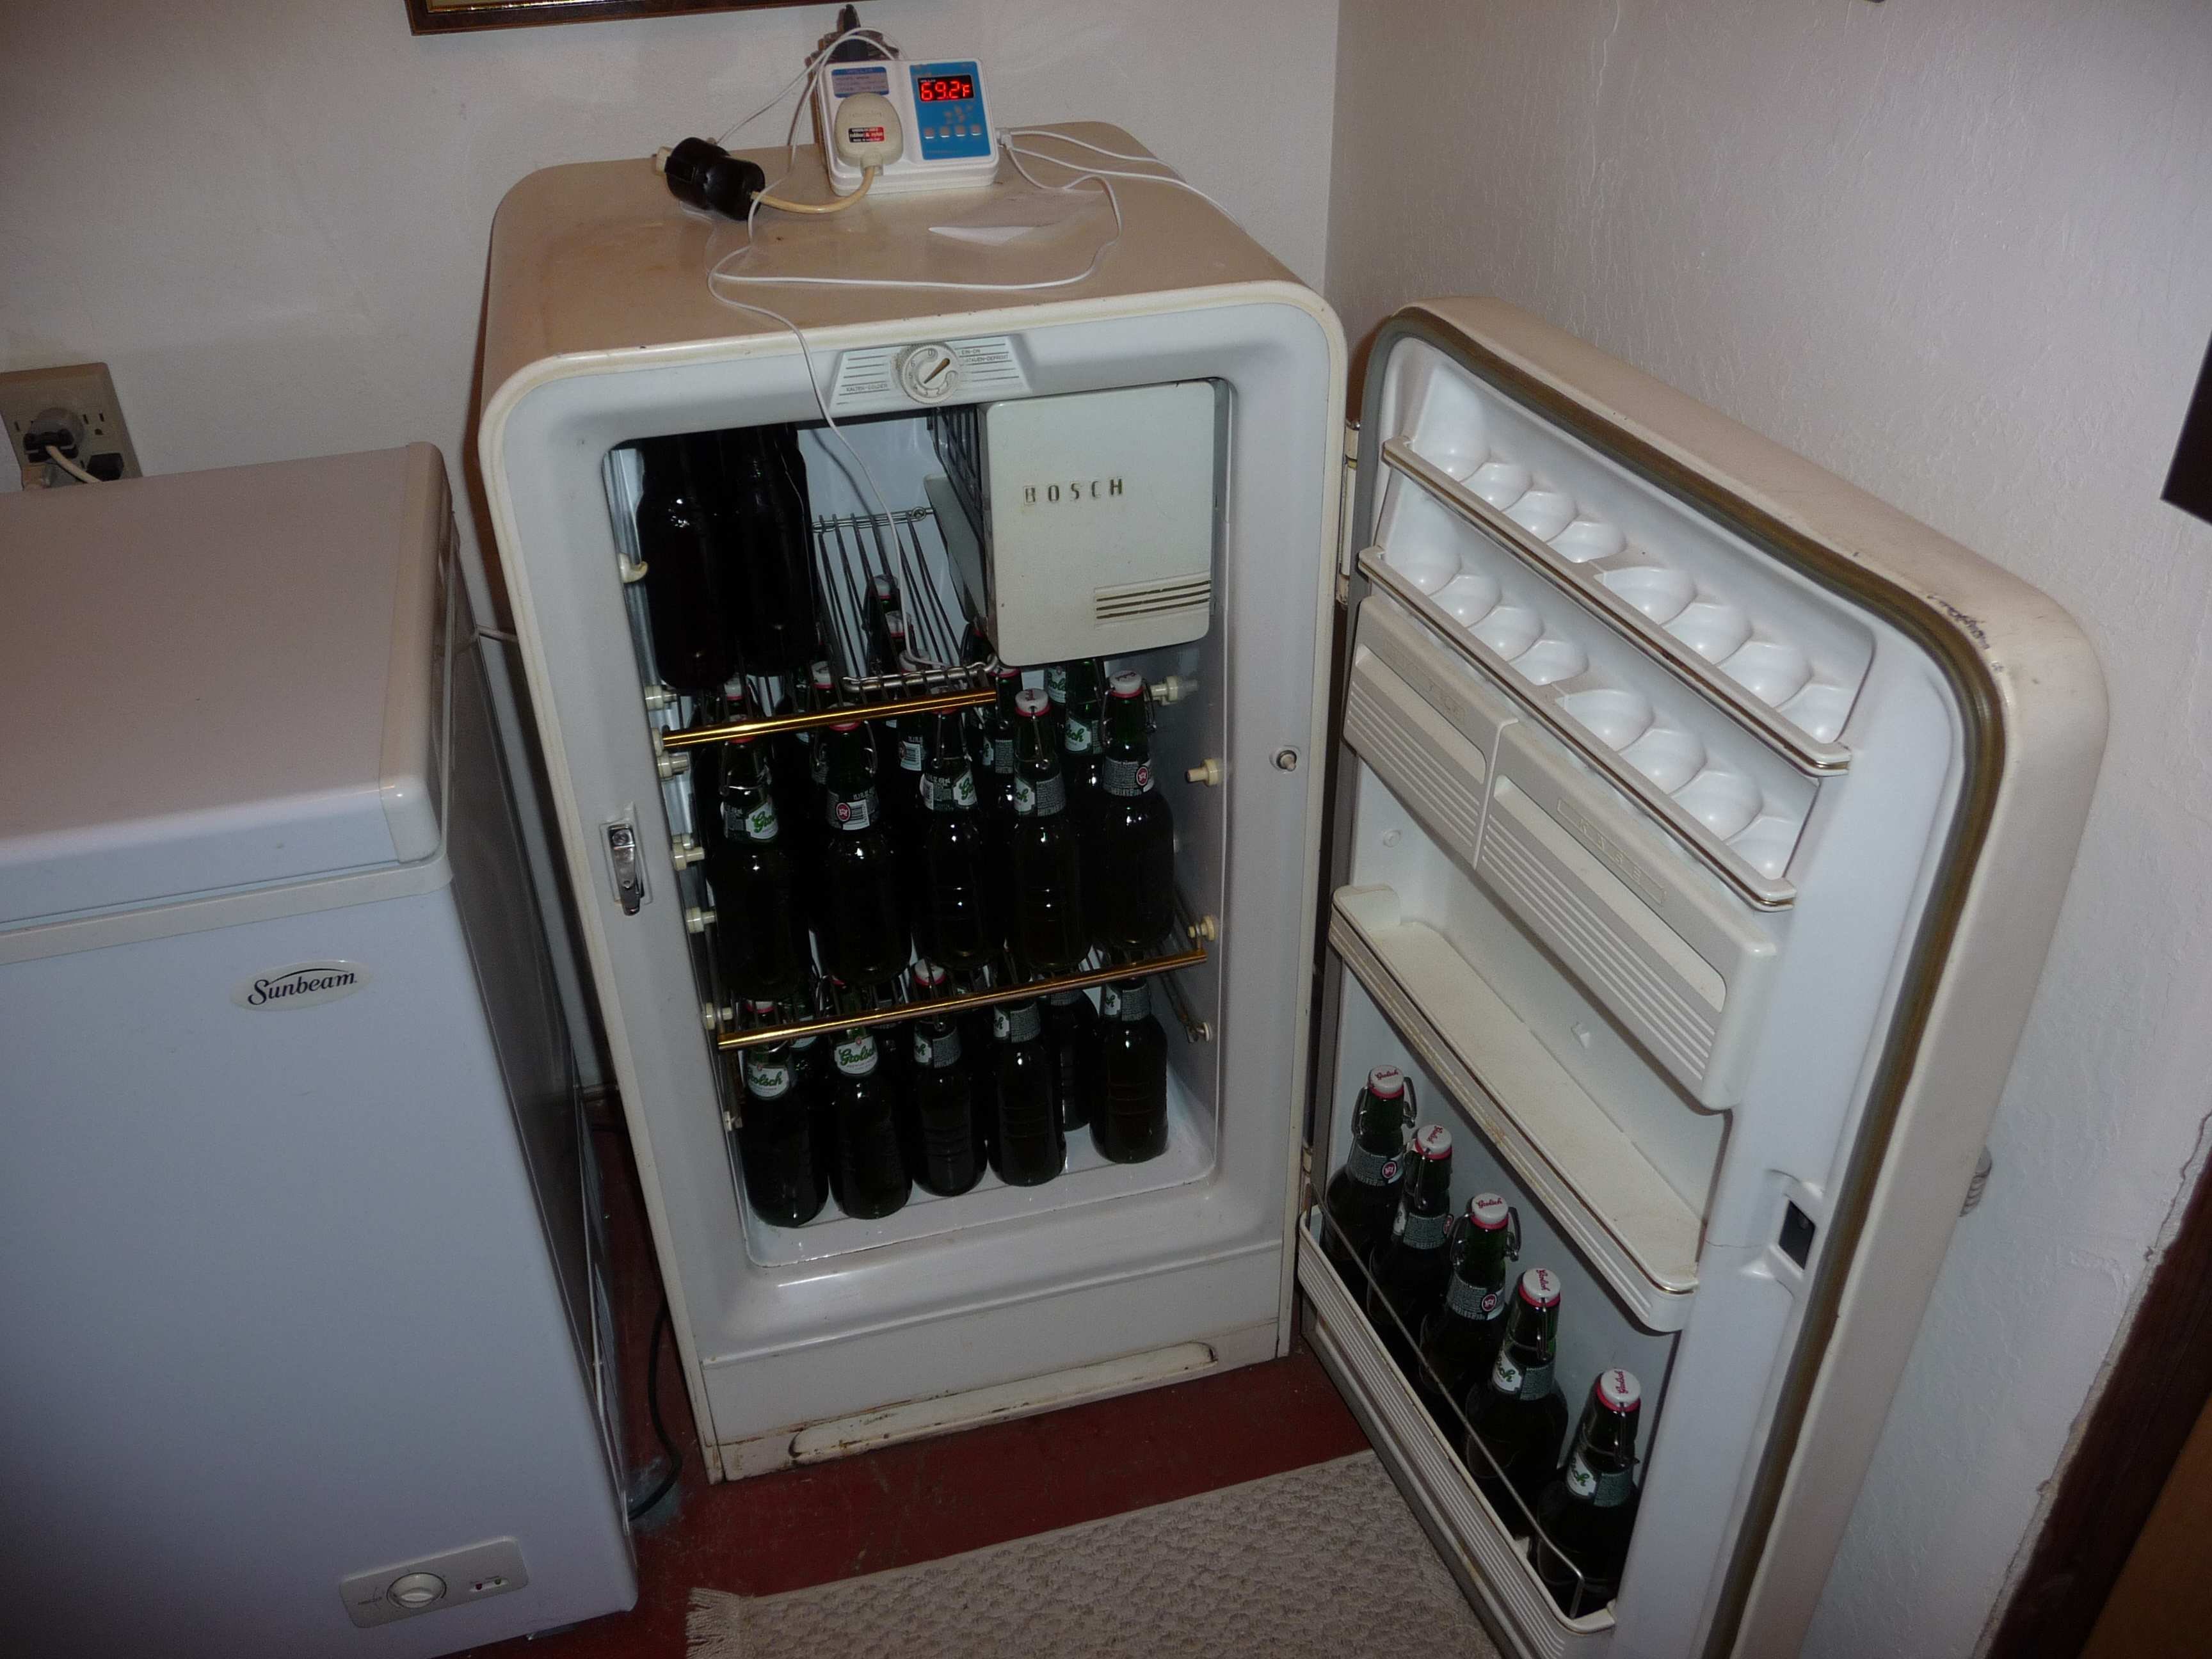 Fridge thermostat bypass question  Homebrew Talk - Beer, Wine, Mead, &  Cider Brewing Discussion Forum